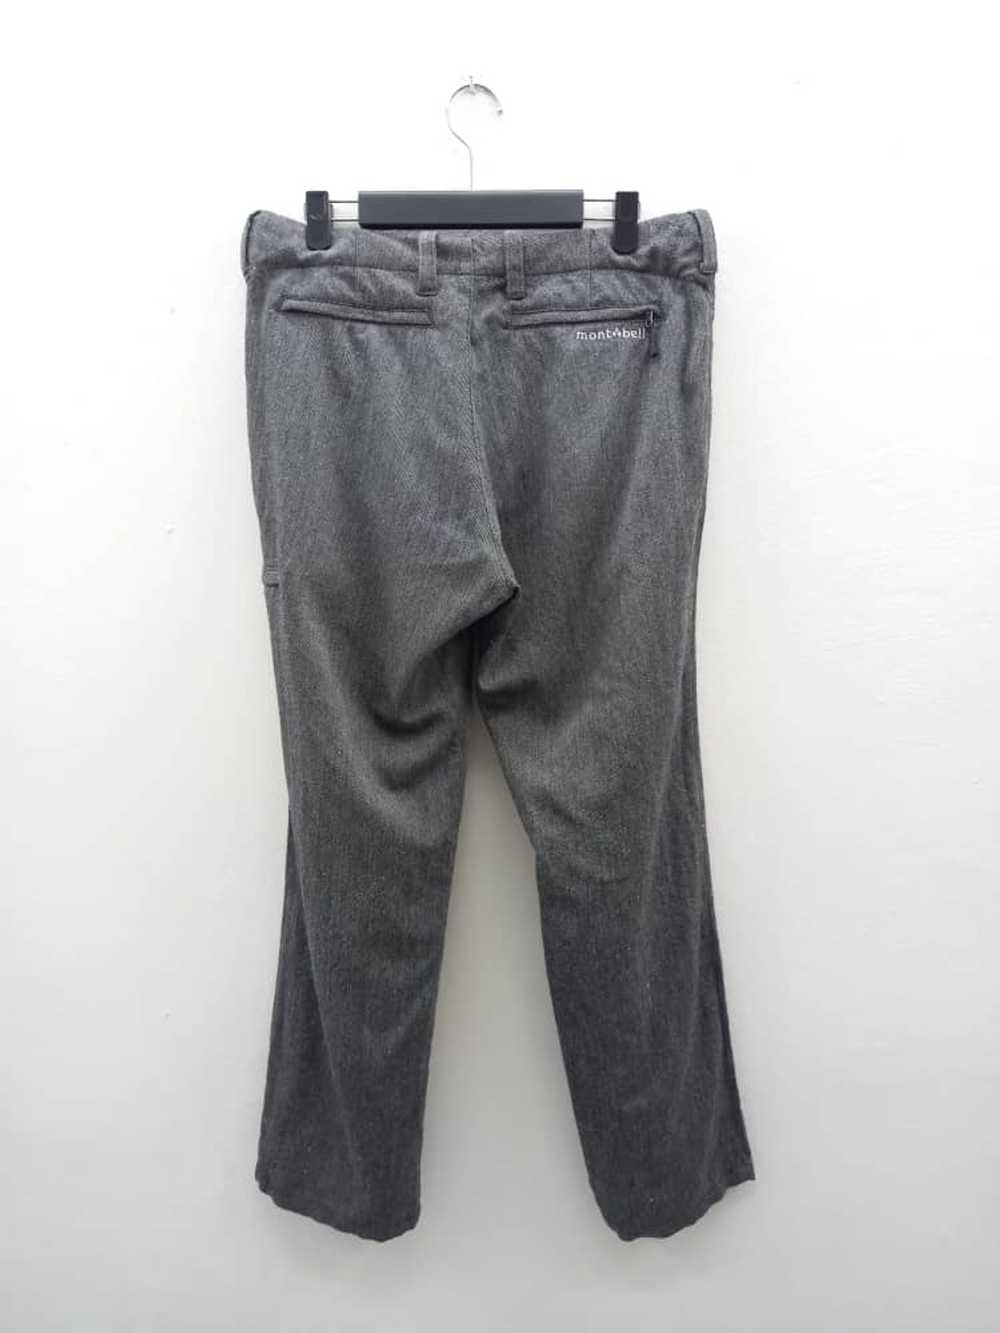 Montbell × Outdoor Life Montbell Wool Pants - image 2